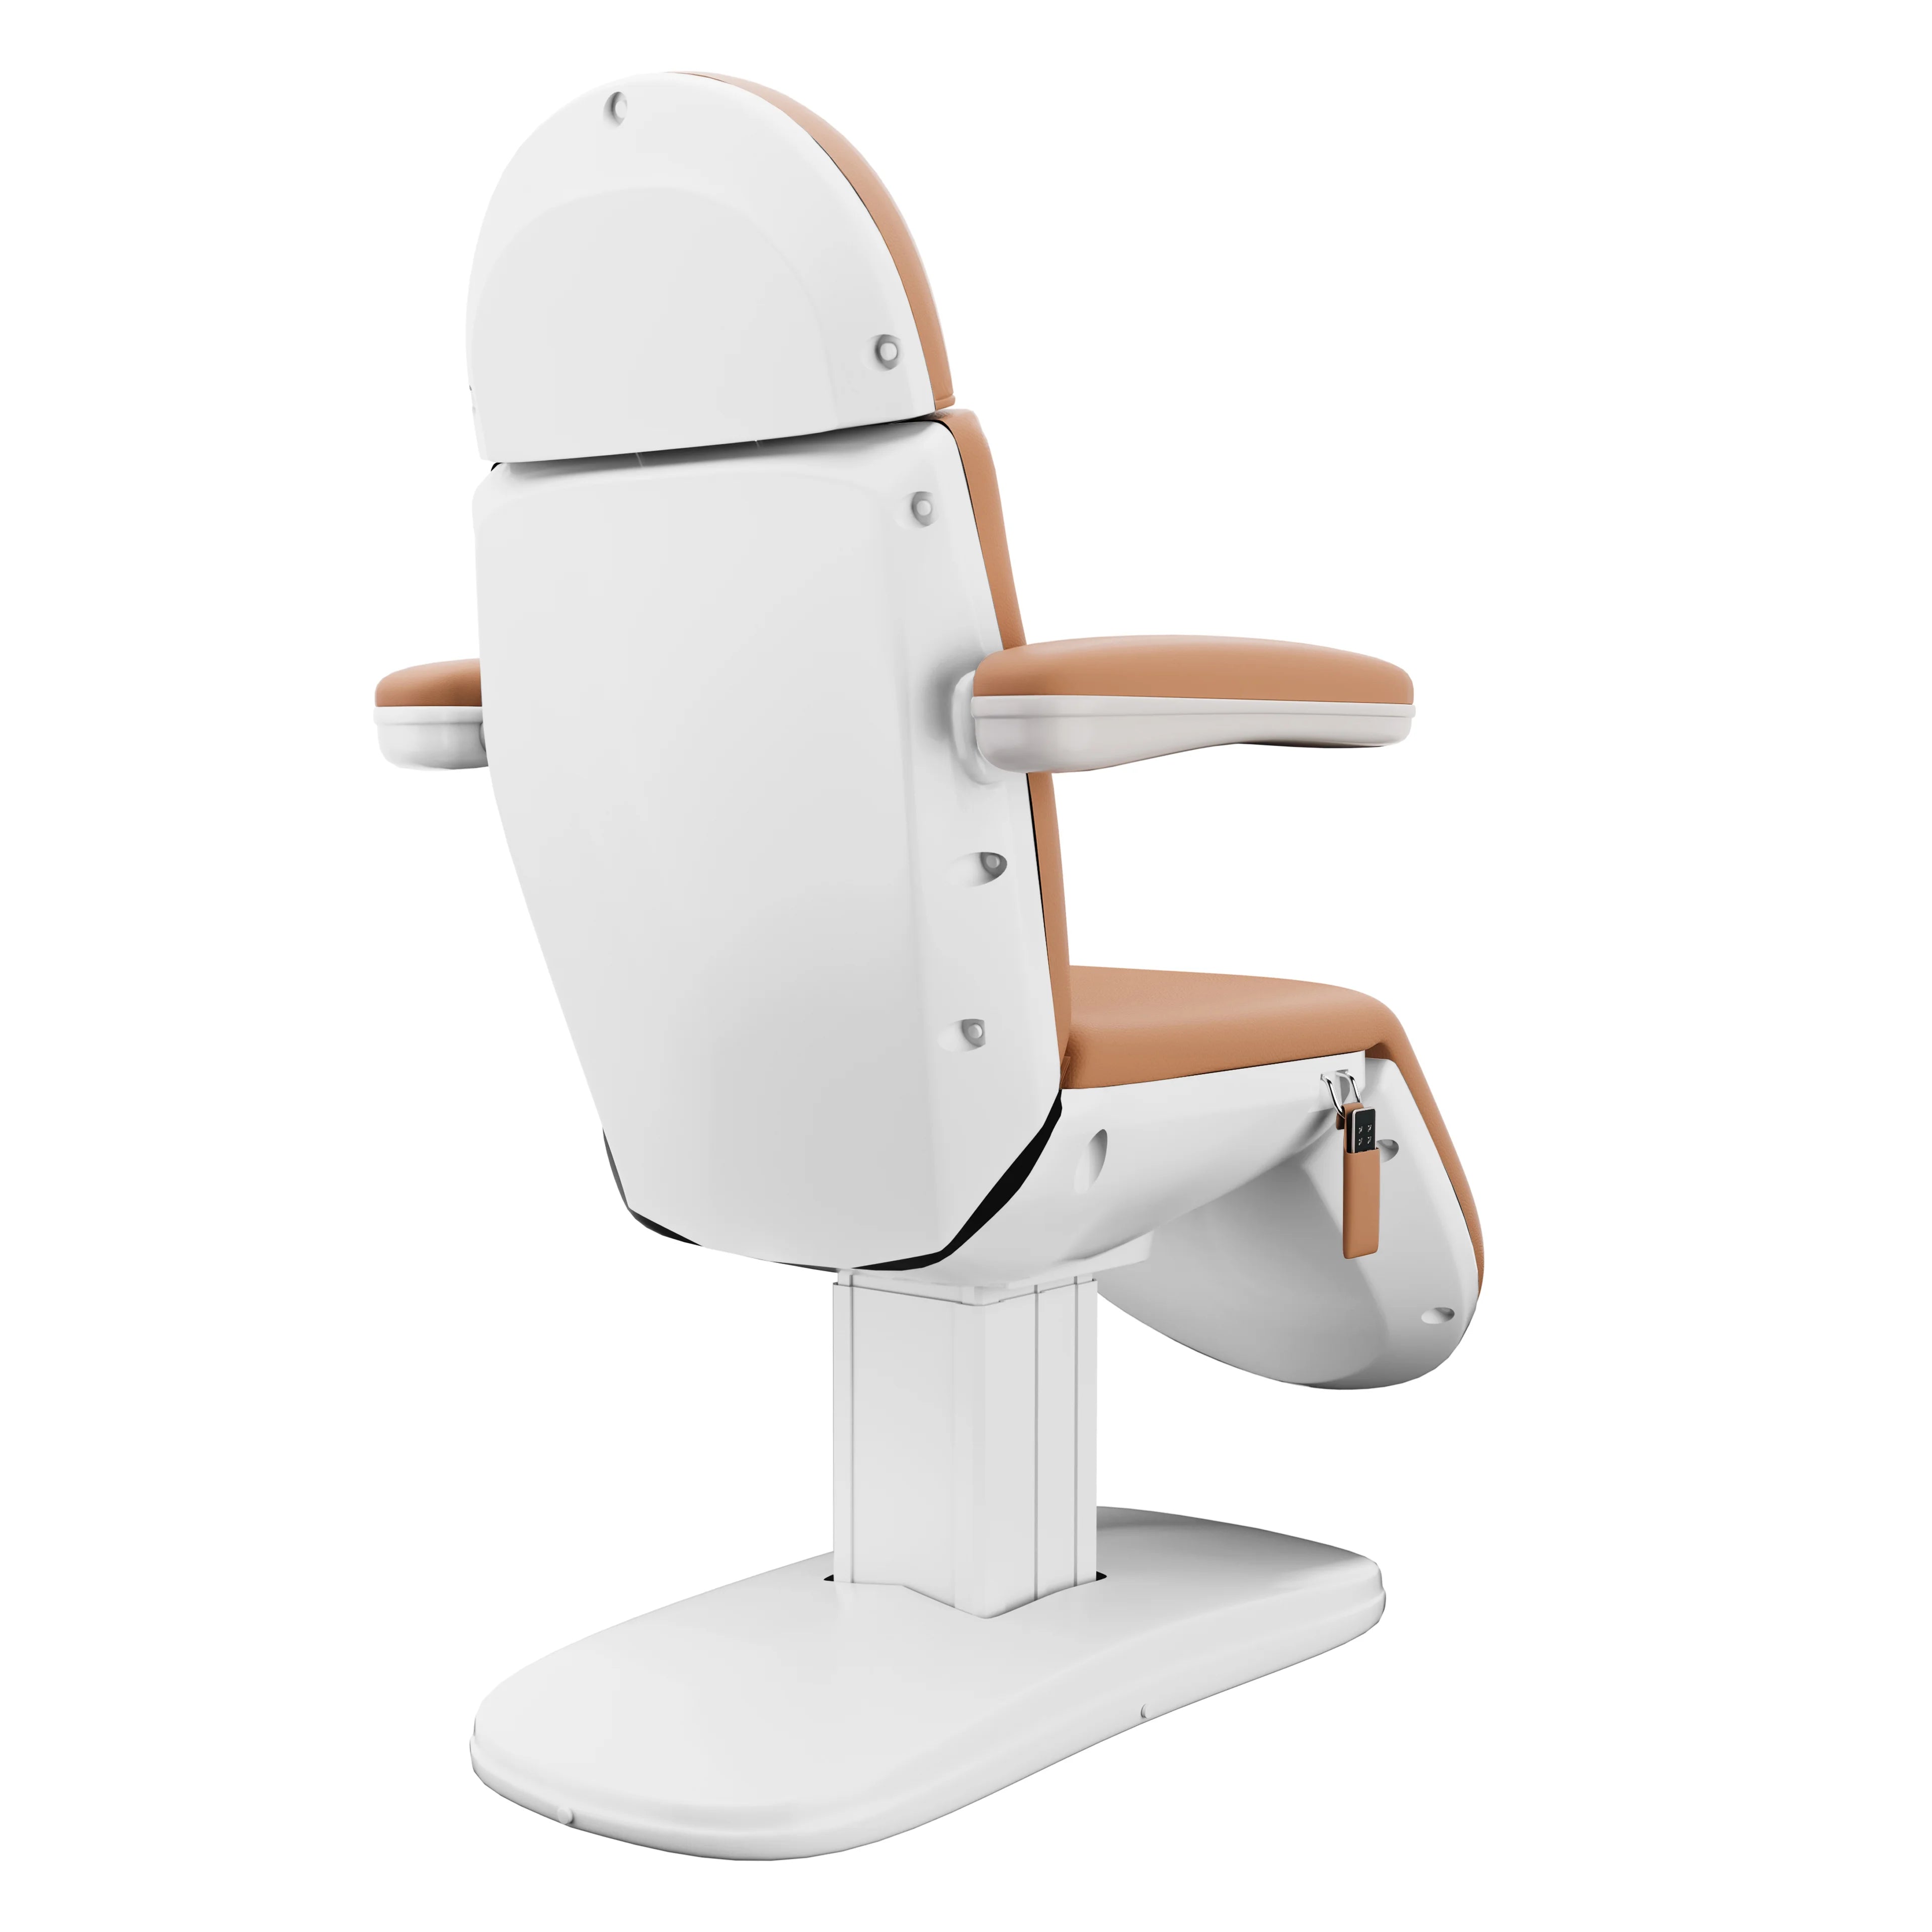 SpaMarc . Benefic (Brown) . 4 Motor Spa Treatment Chair/Bed . (Wireless Remote)